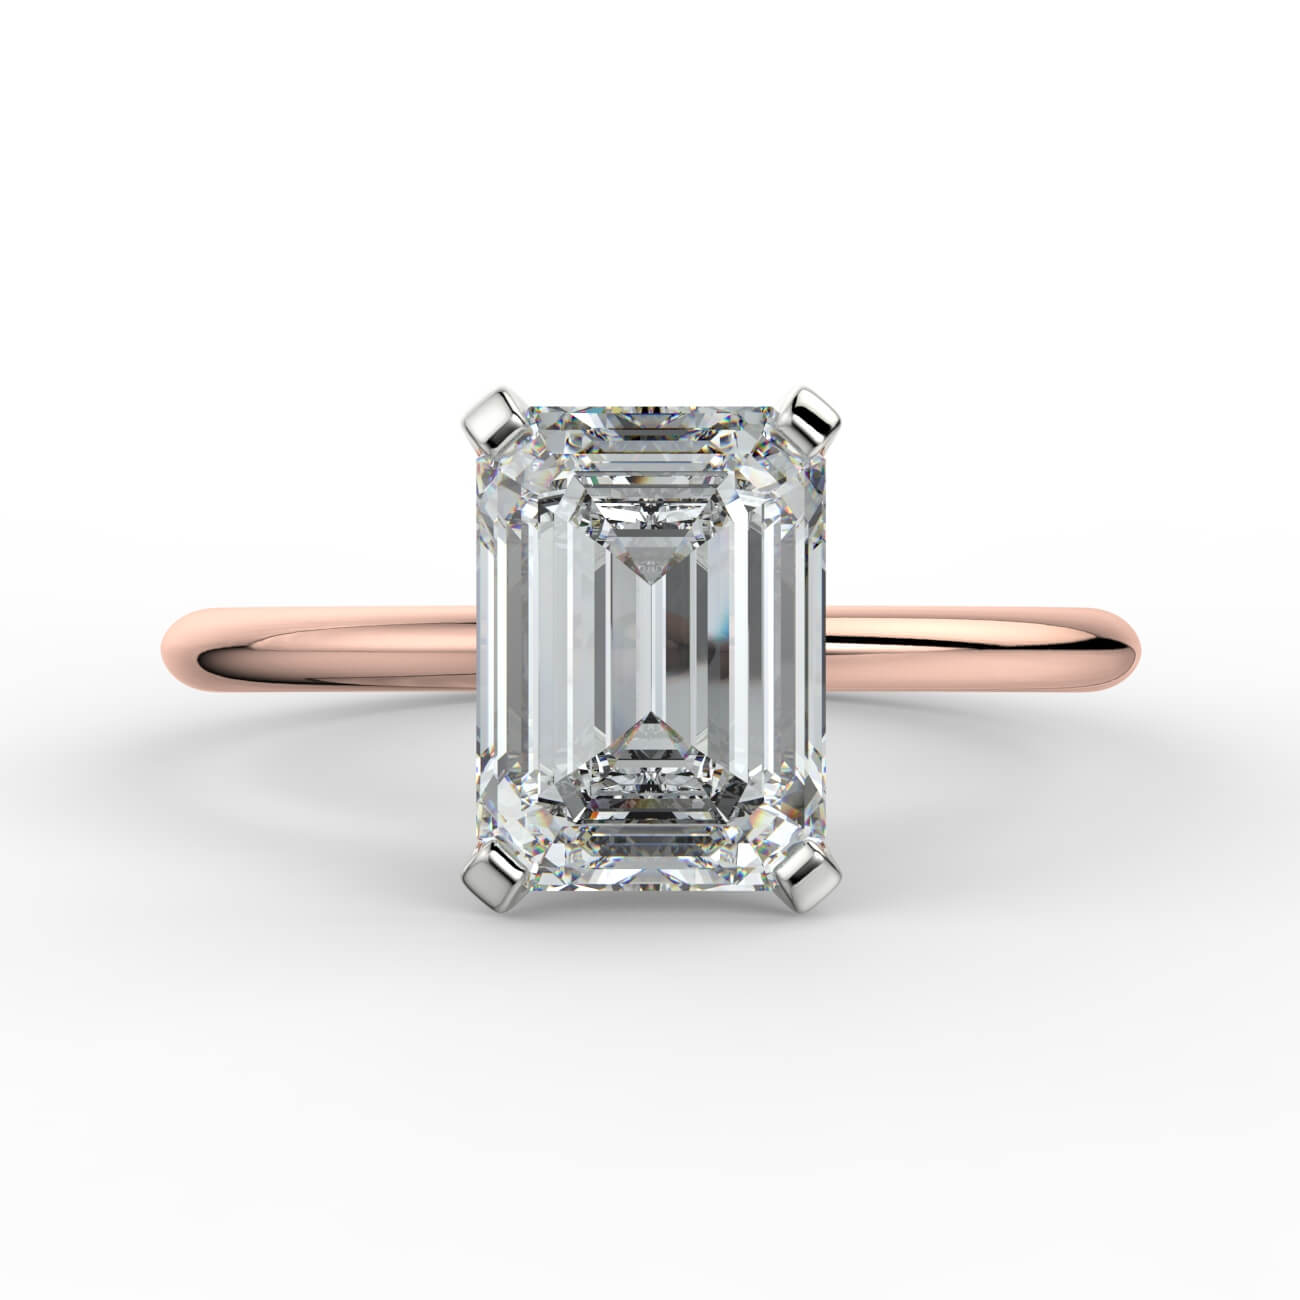 Knife-edge solitaire emerald cut diamond engagement ring in rose and white gold – Australian Diamond Network